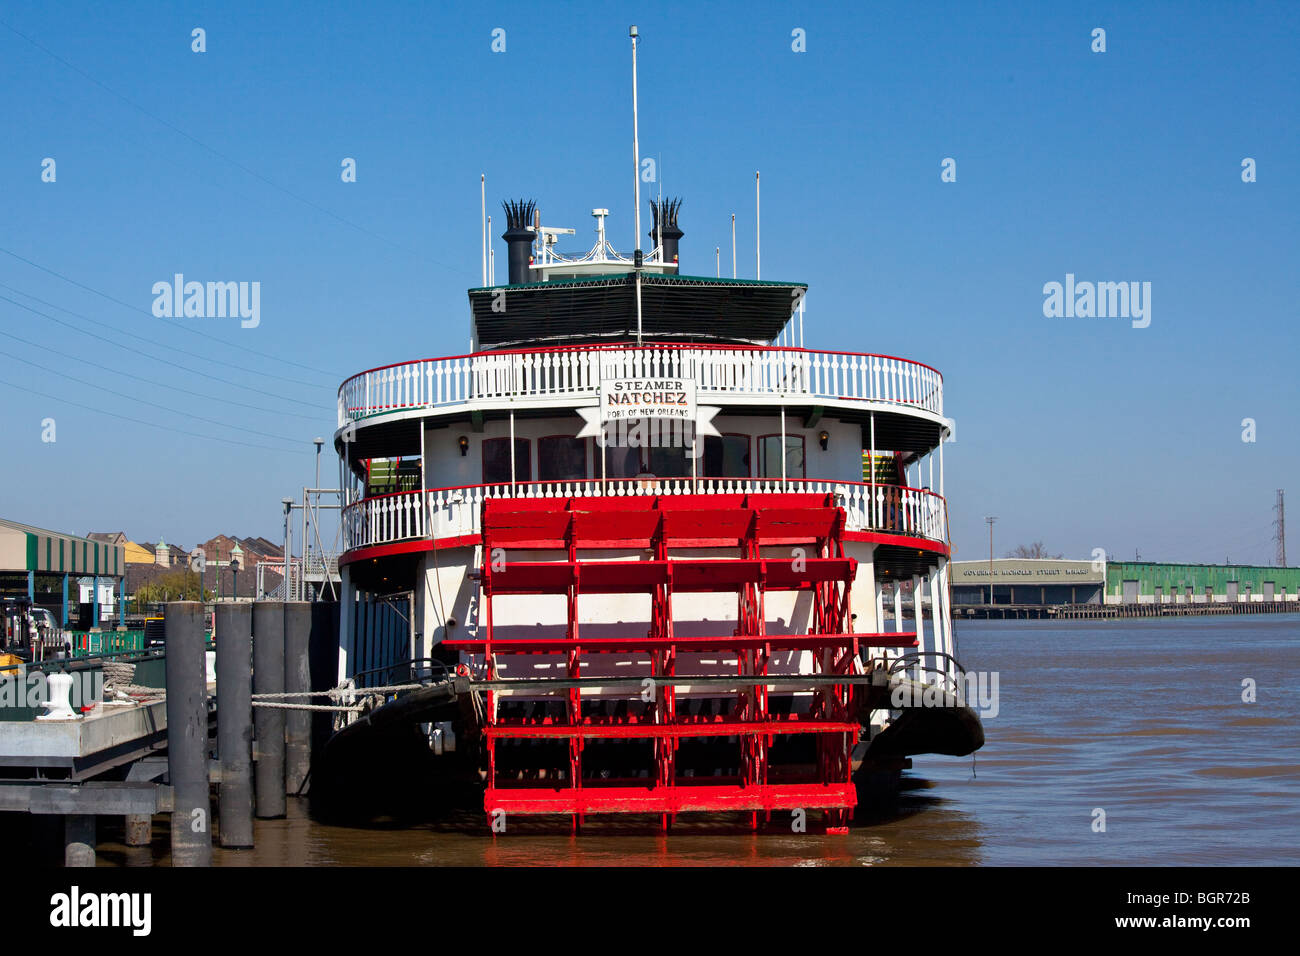 The Natchez Steamer Paddle Wheel Boat in the French Quarter of New Orleans LA Stock Photo